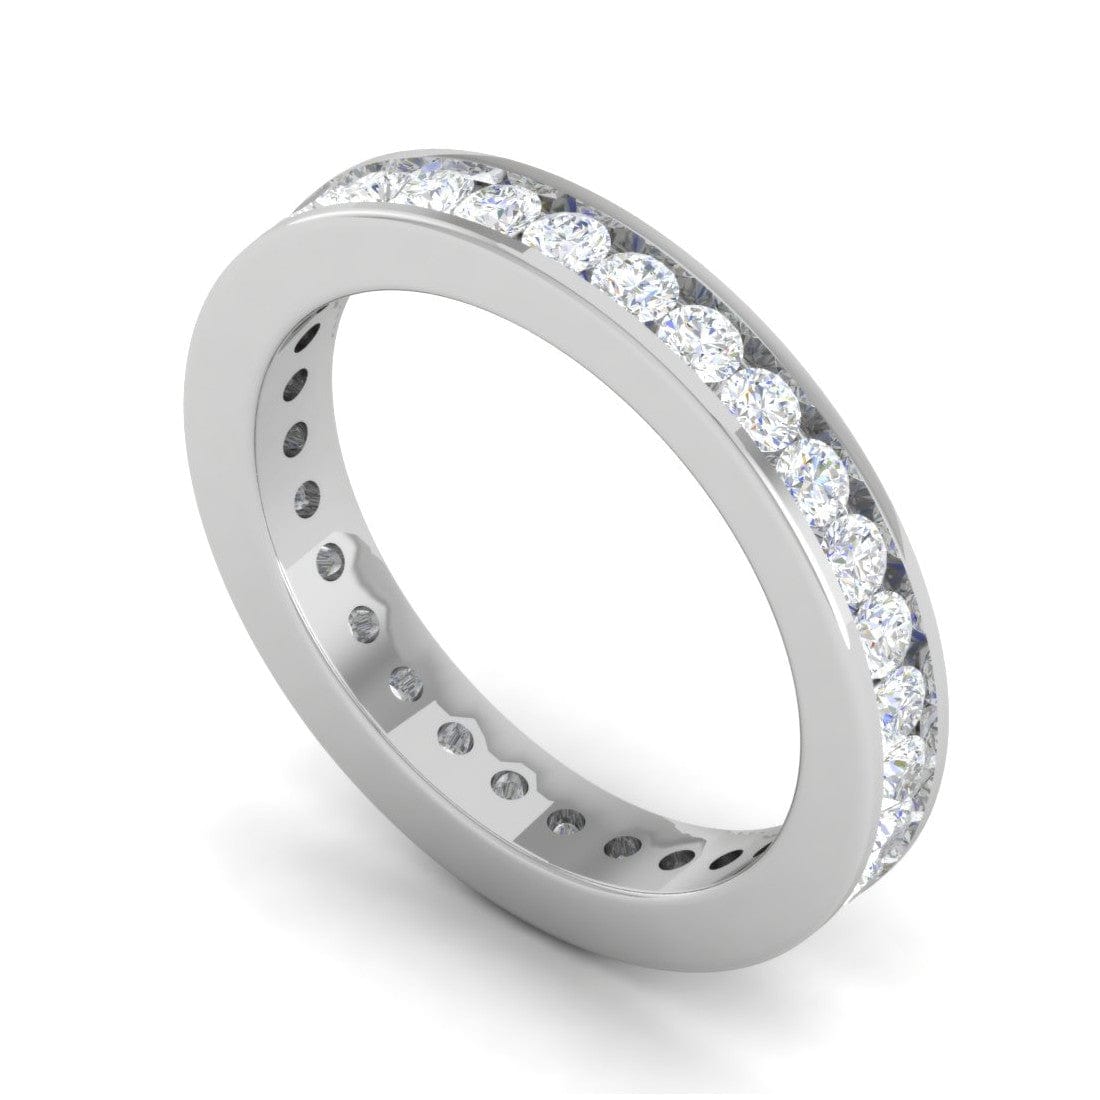 Platinum rings - Buy Platinum rings Online at Best Prices in India -  LimeRoad.com | page 2